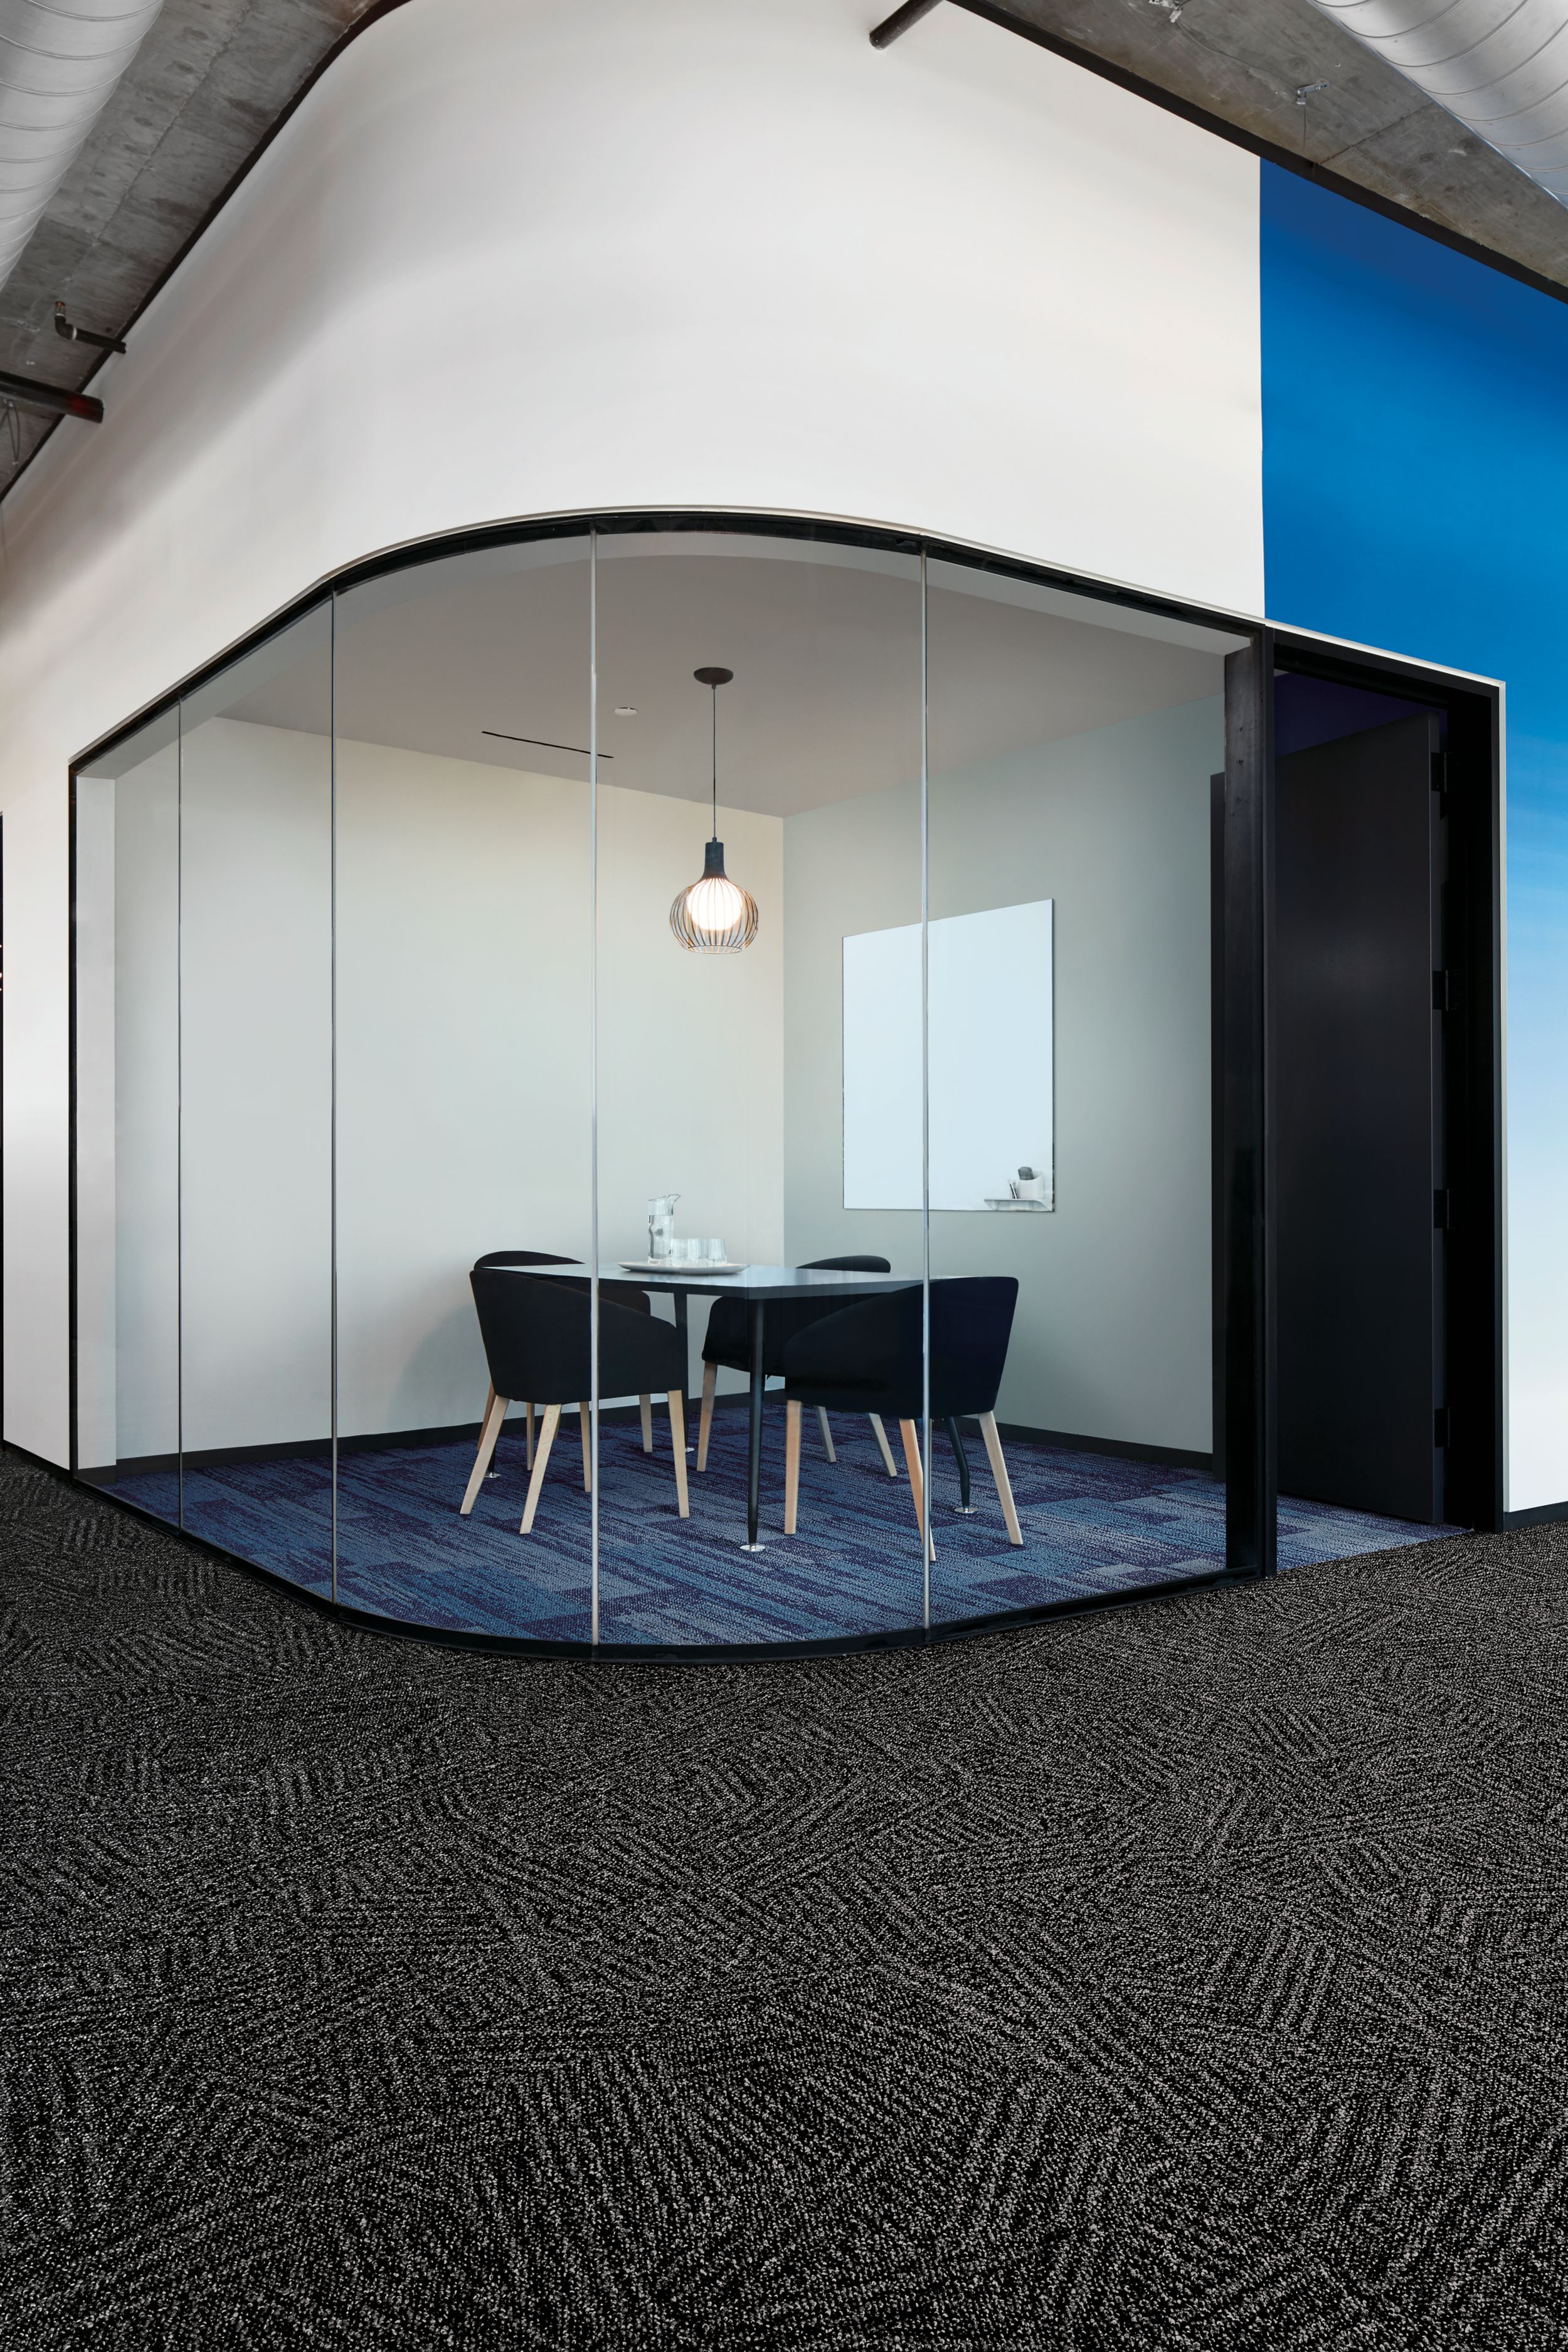 Interface AE317 plank carpet tile in enclosed meting room with Open Air 412 carpet tile in foreground imagen número 4